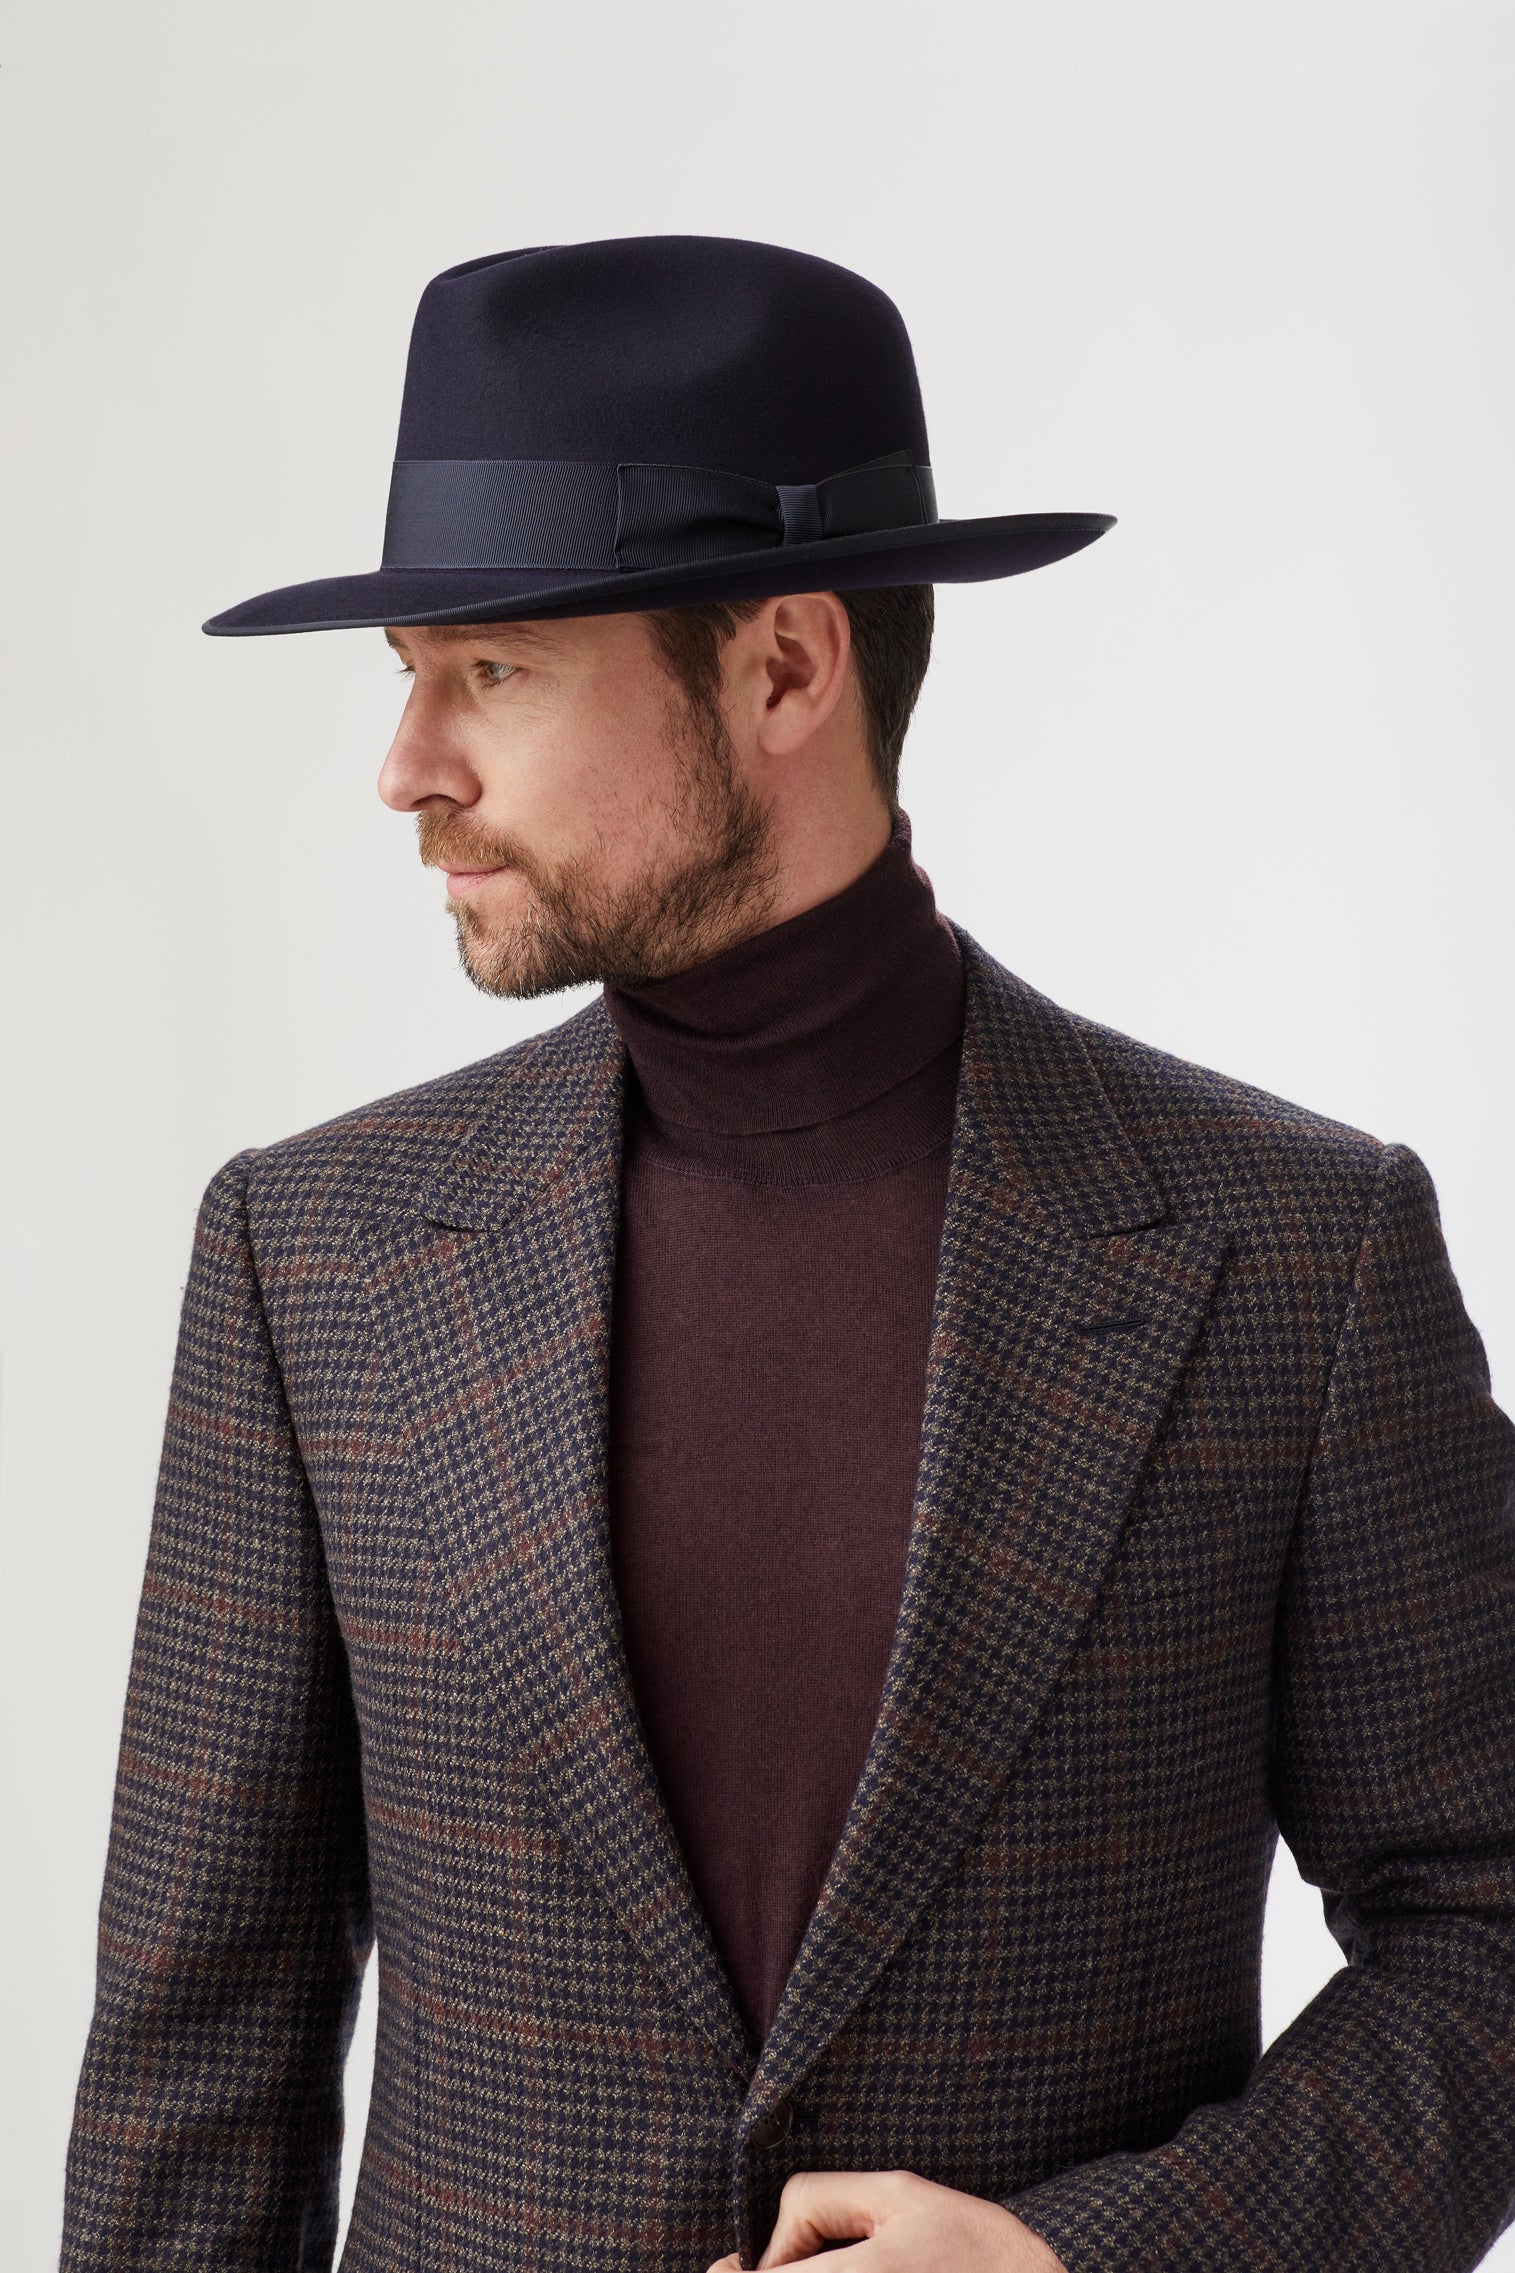 St James's Fedora - Hats for Long Face Shapes - Lock & Co. Hatters London UK